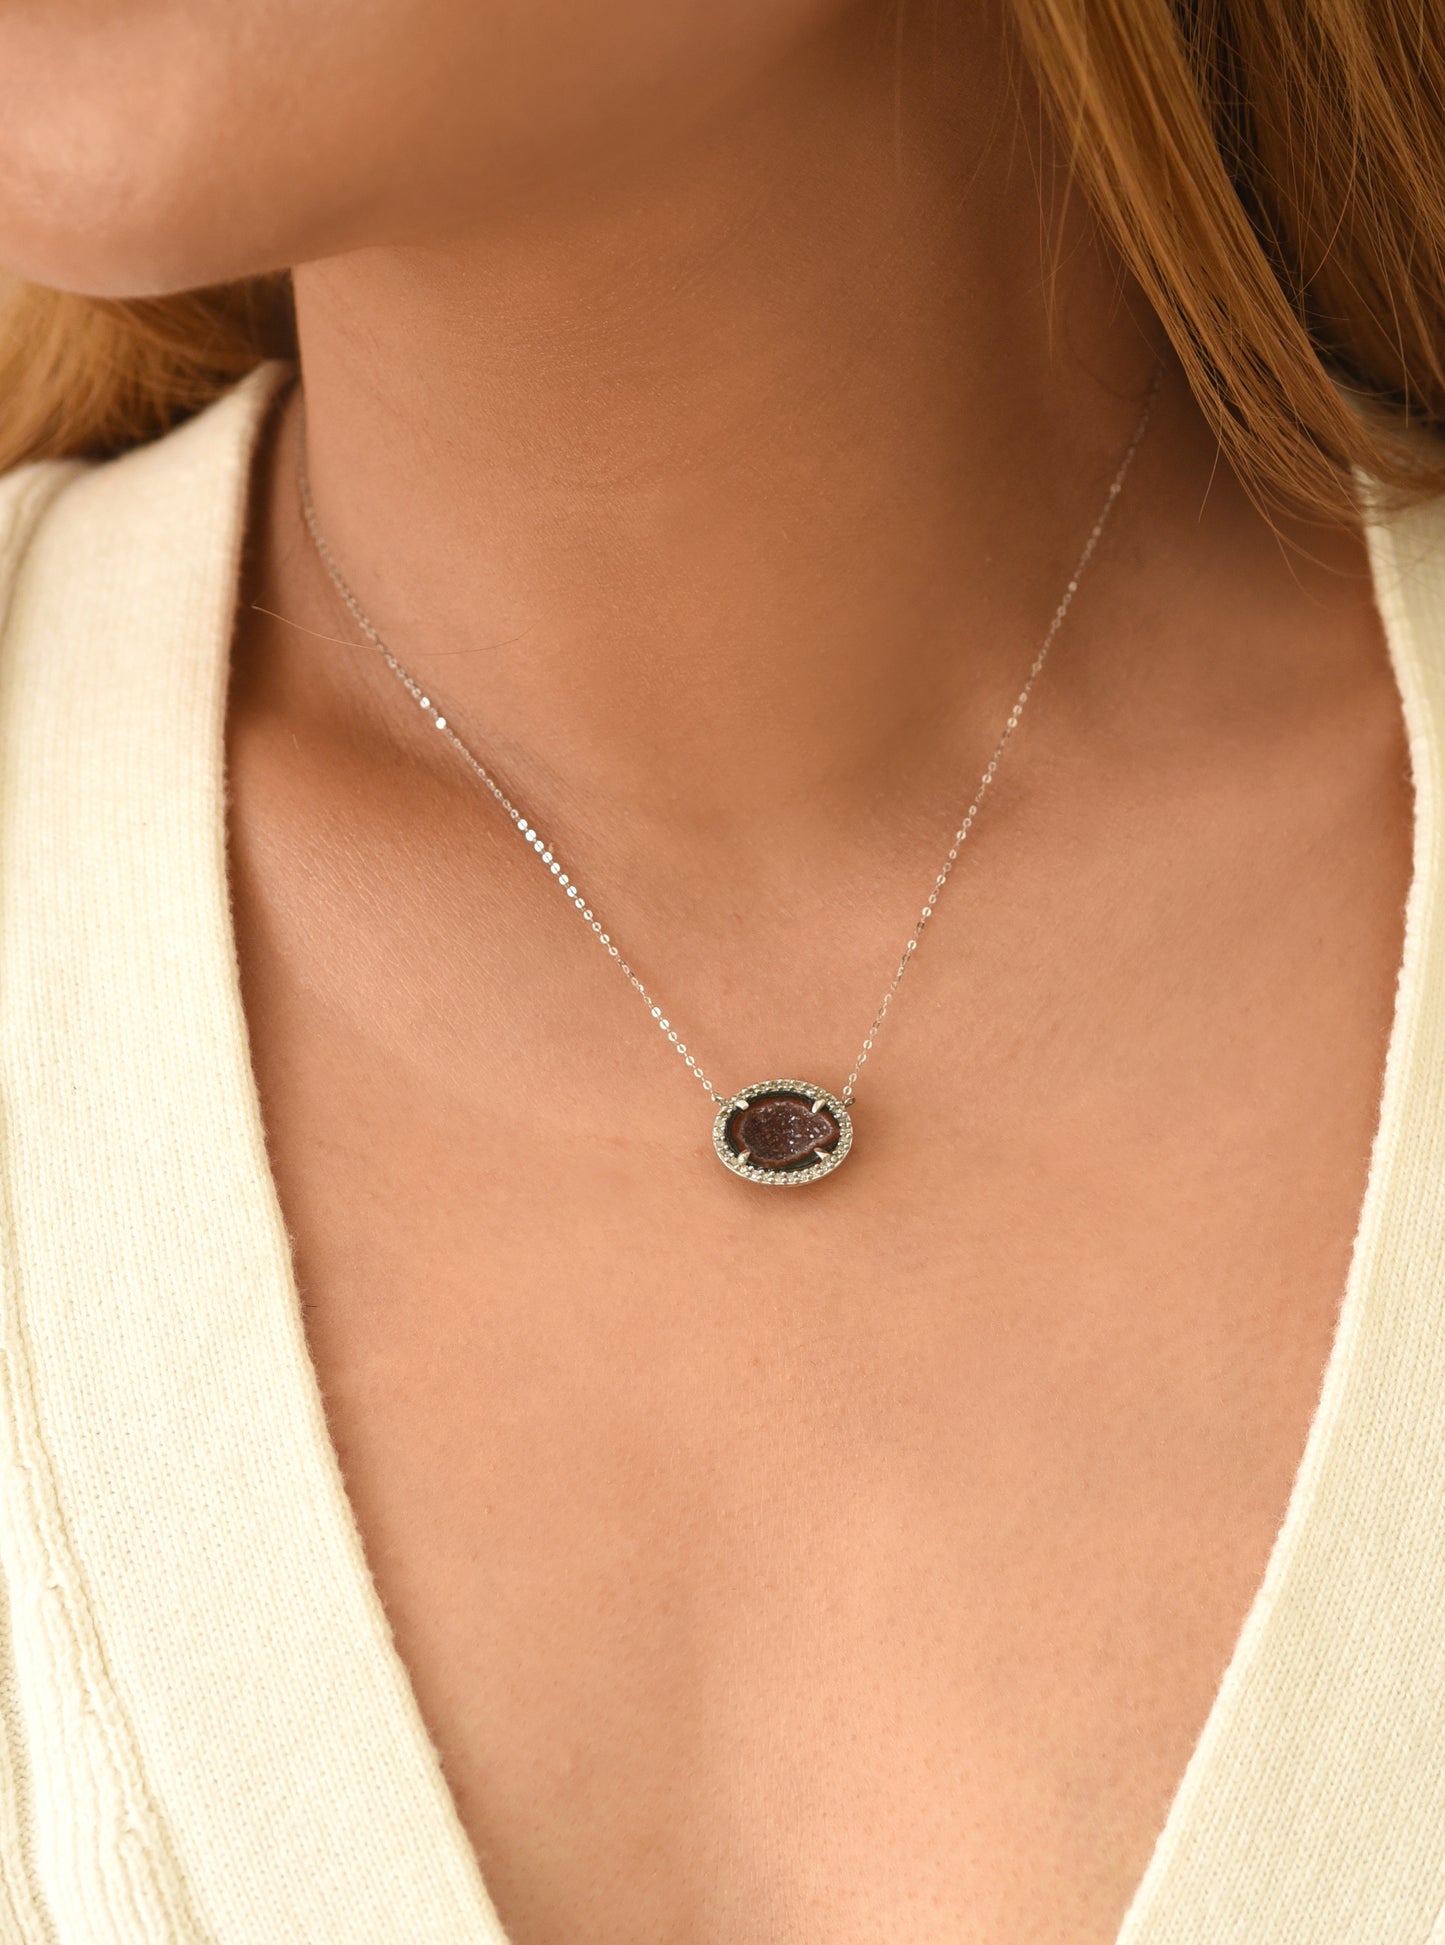 18k White Gold Geode Necklace with Diamond